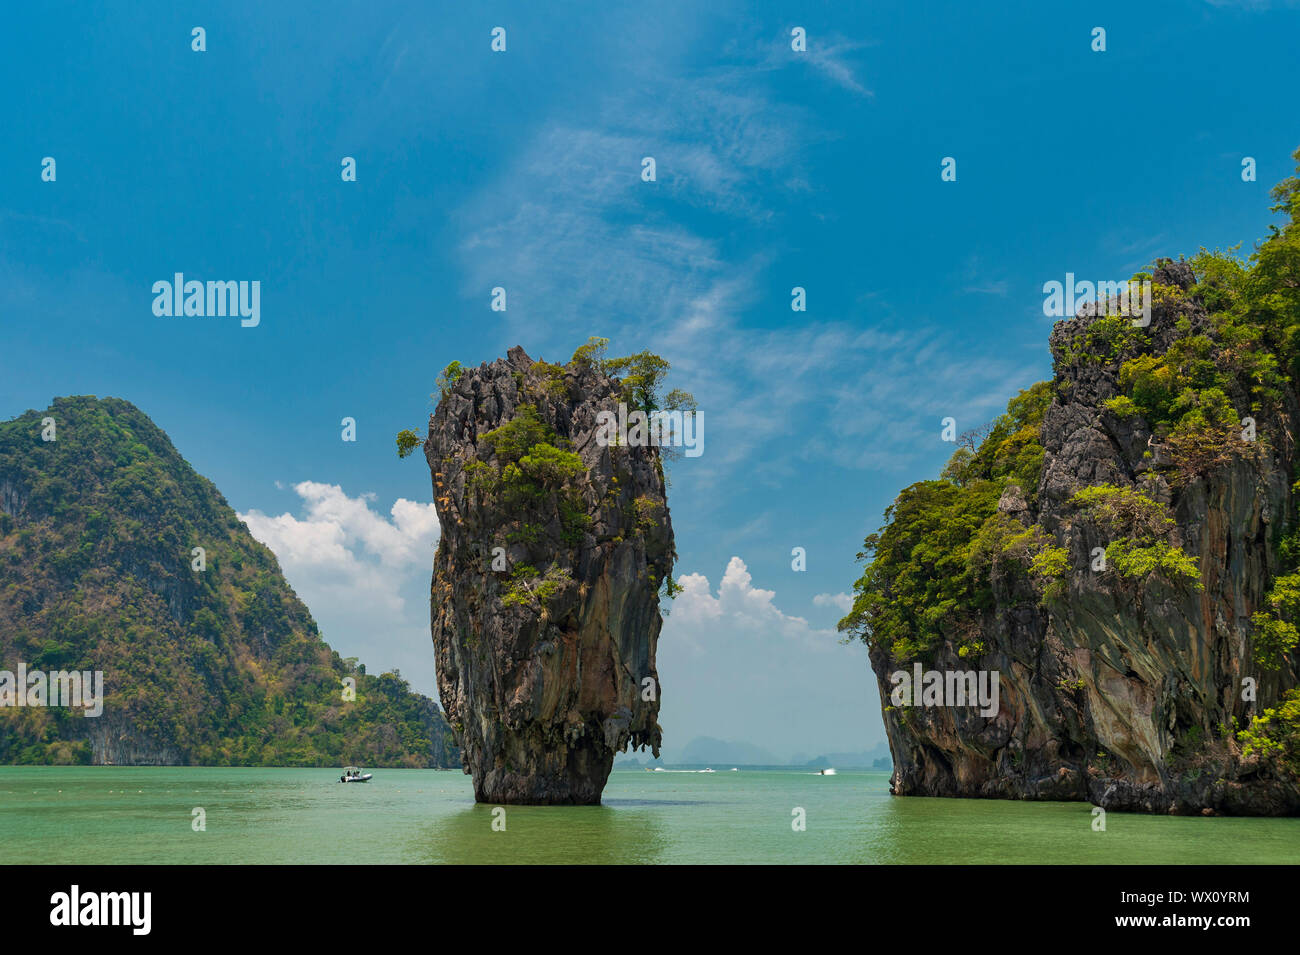 James Bond Island, featured in the movie The Man with the Golden Gun, Phang Nga, Thailand, Southeast Asia, Asia Stock Photo